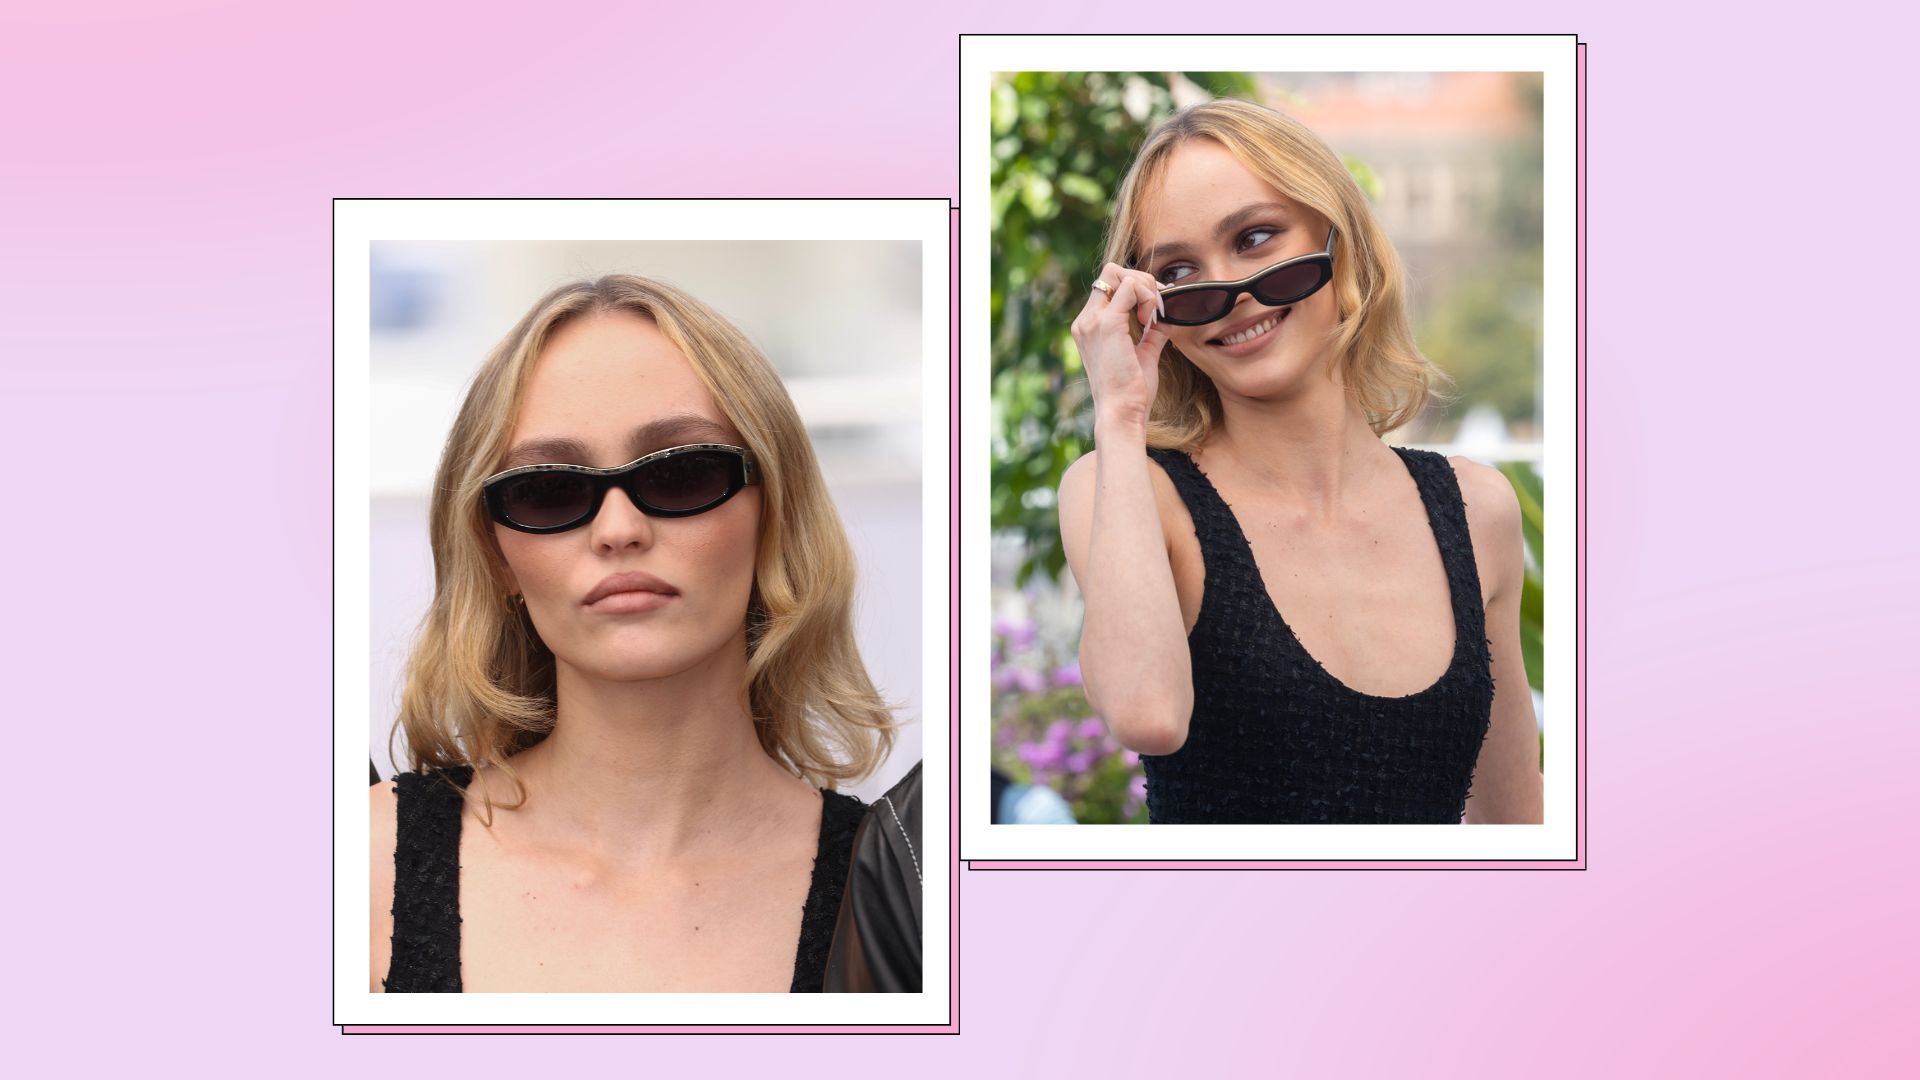 Lily-Rose Depp Wore A Belly Chain To The Chanel Show